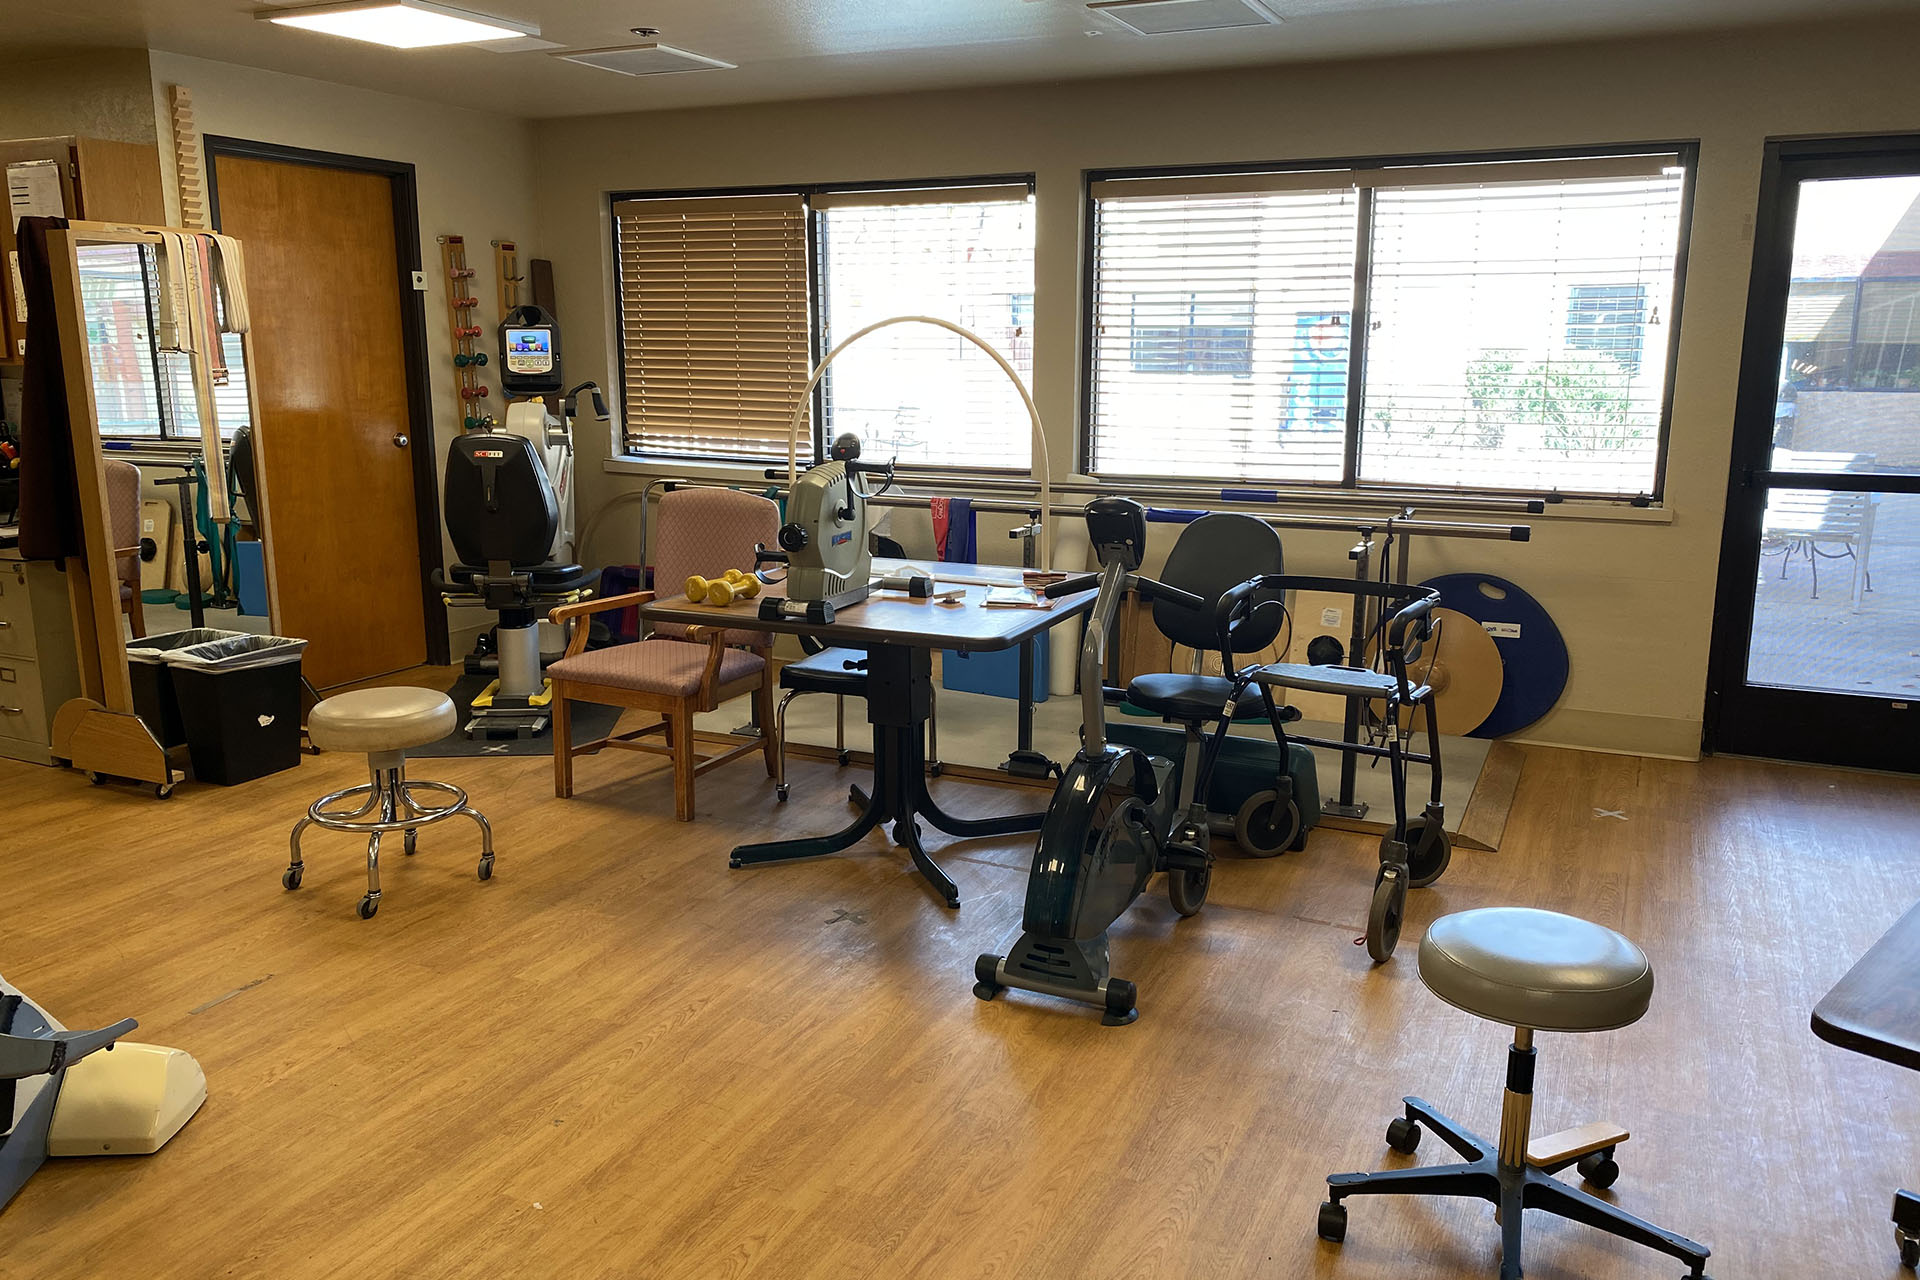 Sedona Location gym and physical therapy room